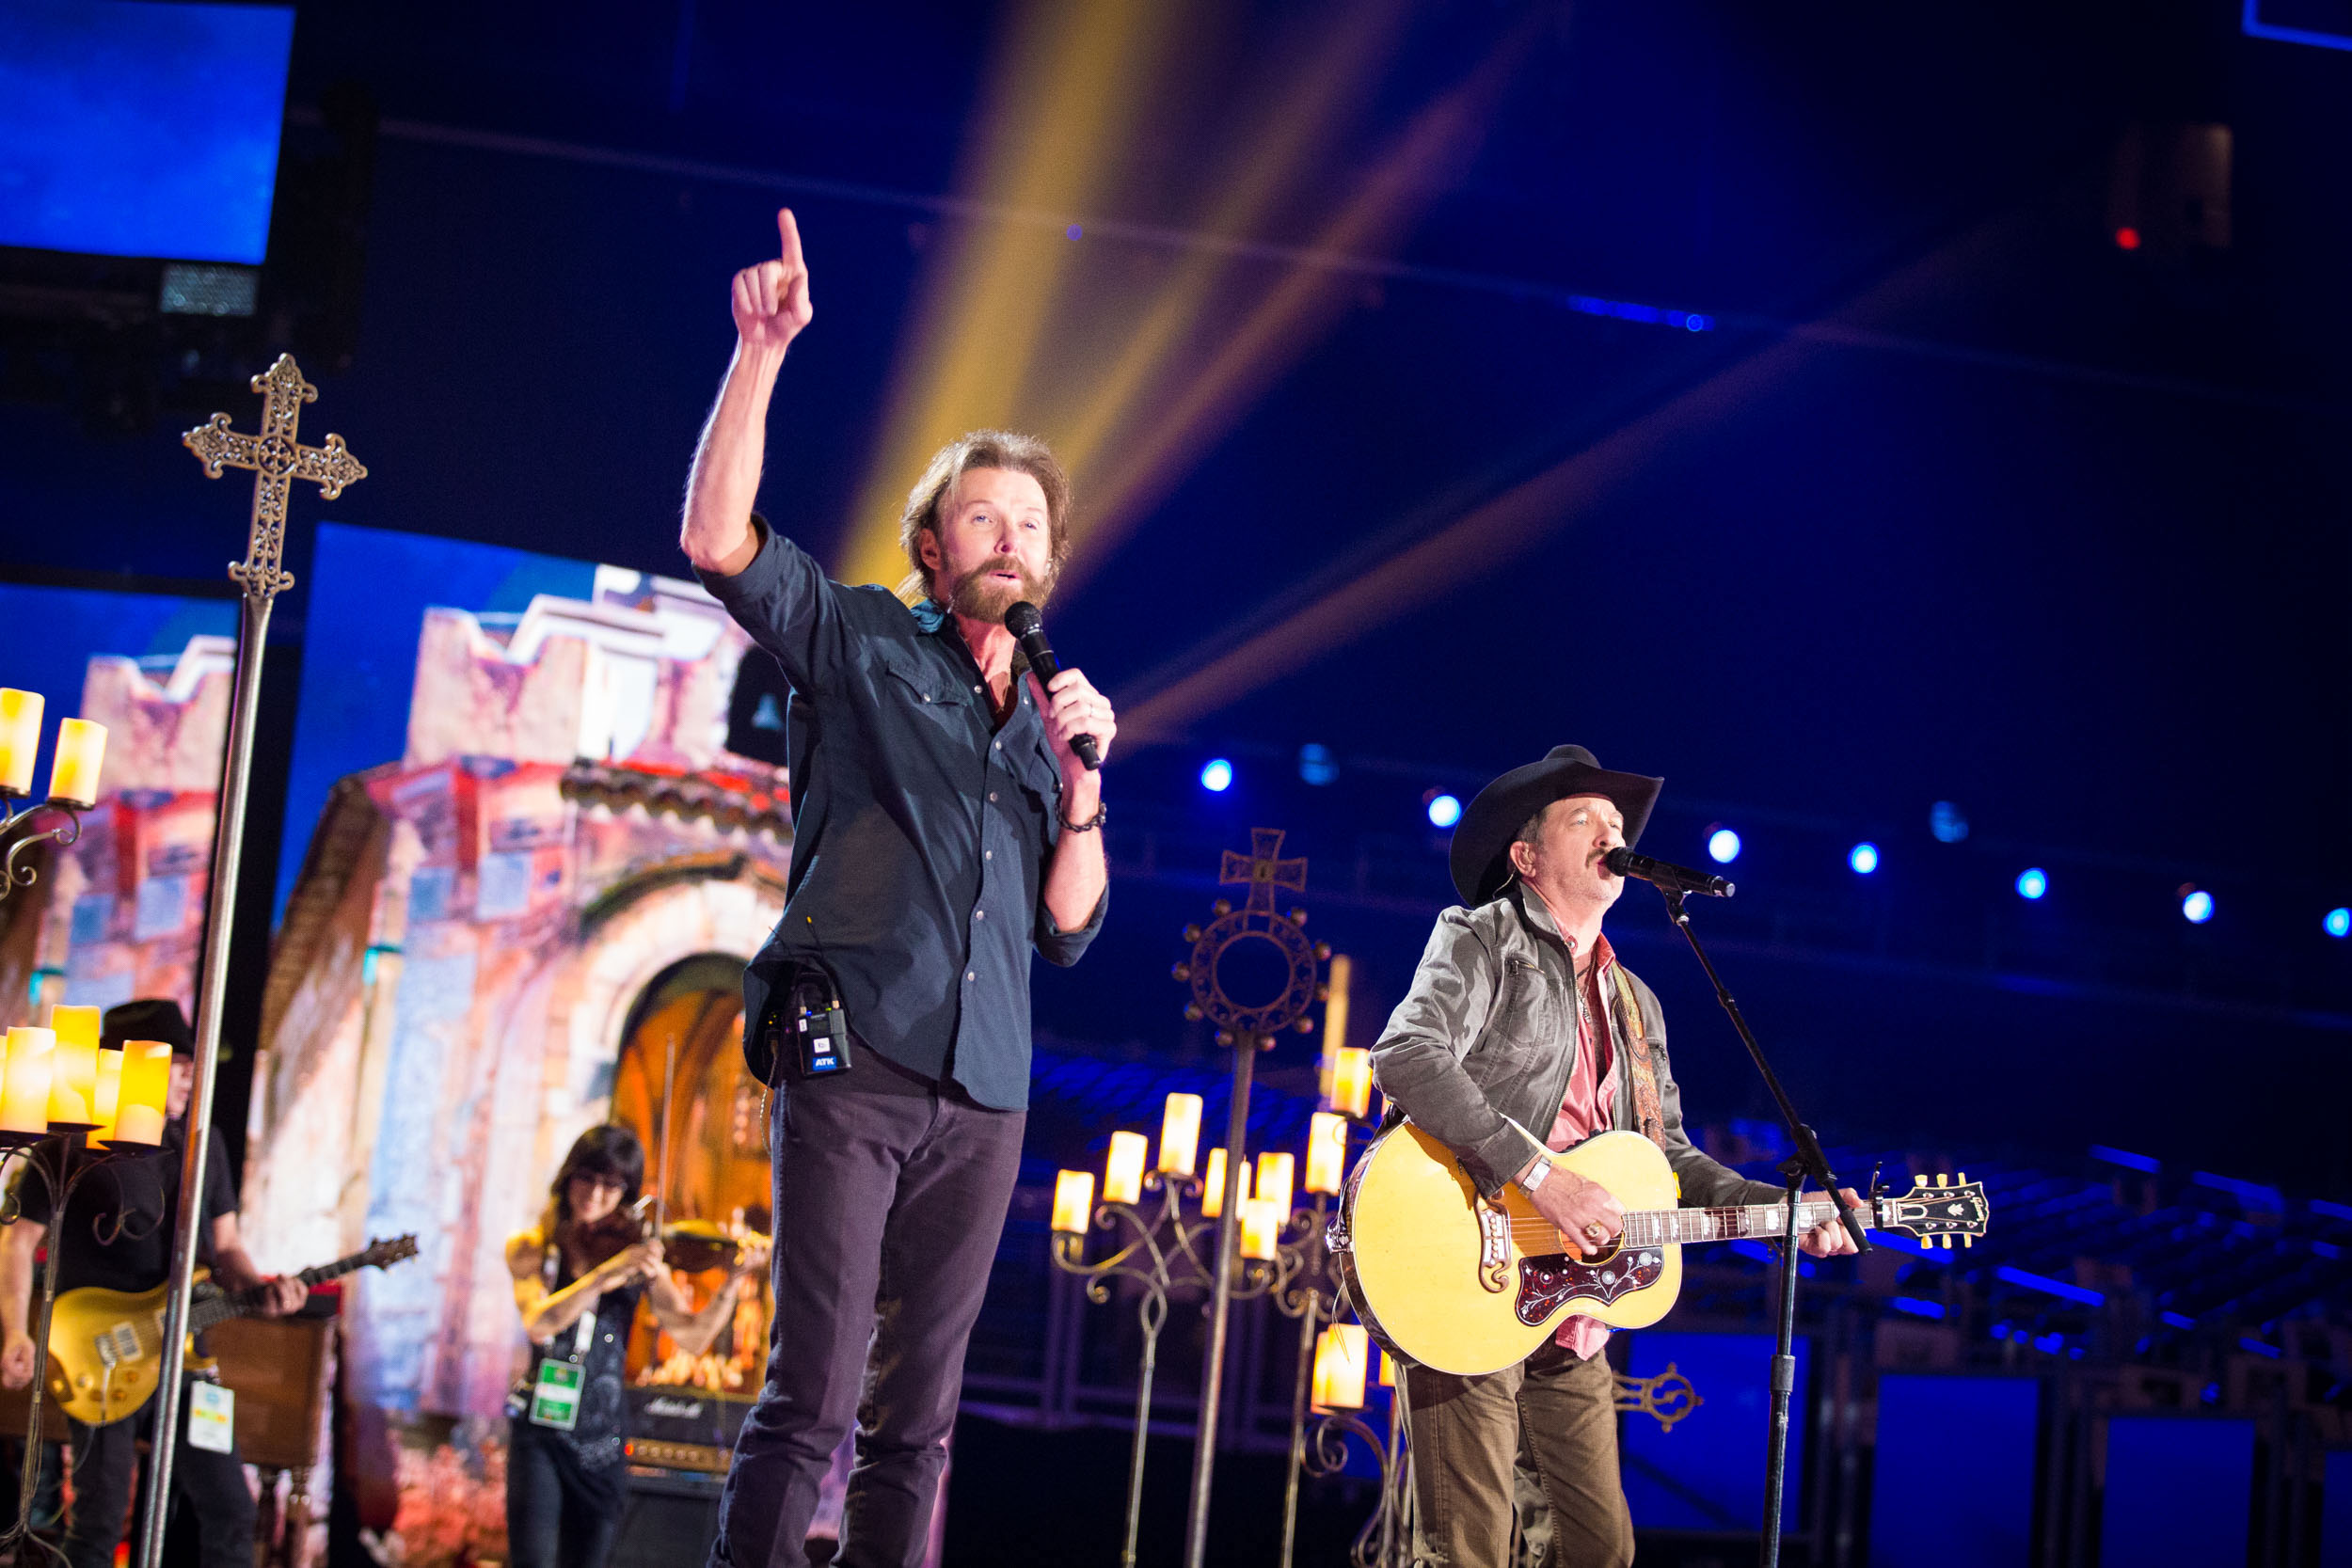 Florida Photography | Brooks & Dunn - Music and Celebrity | Steven Martine